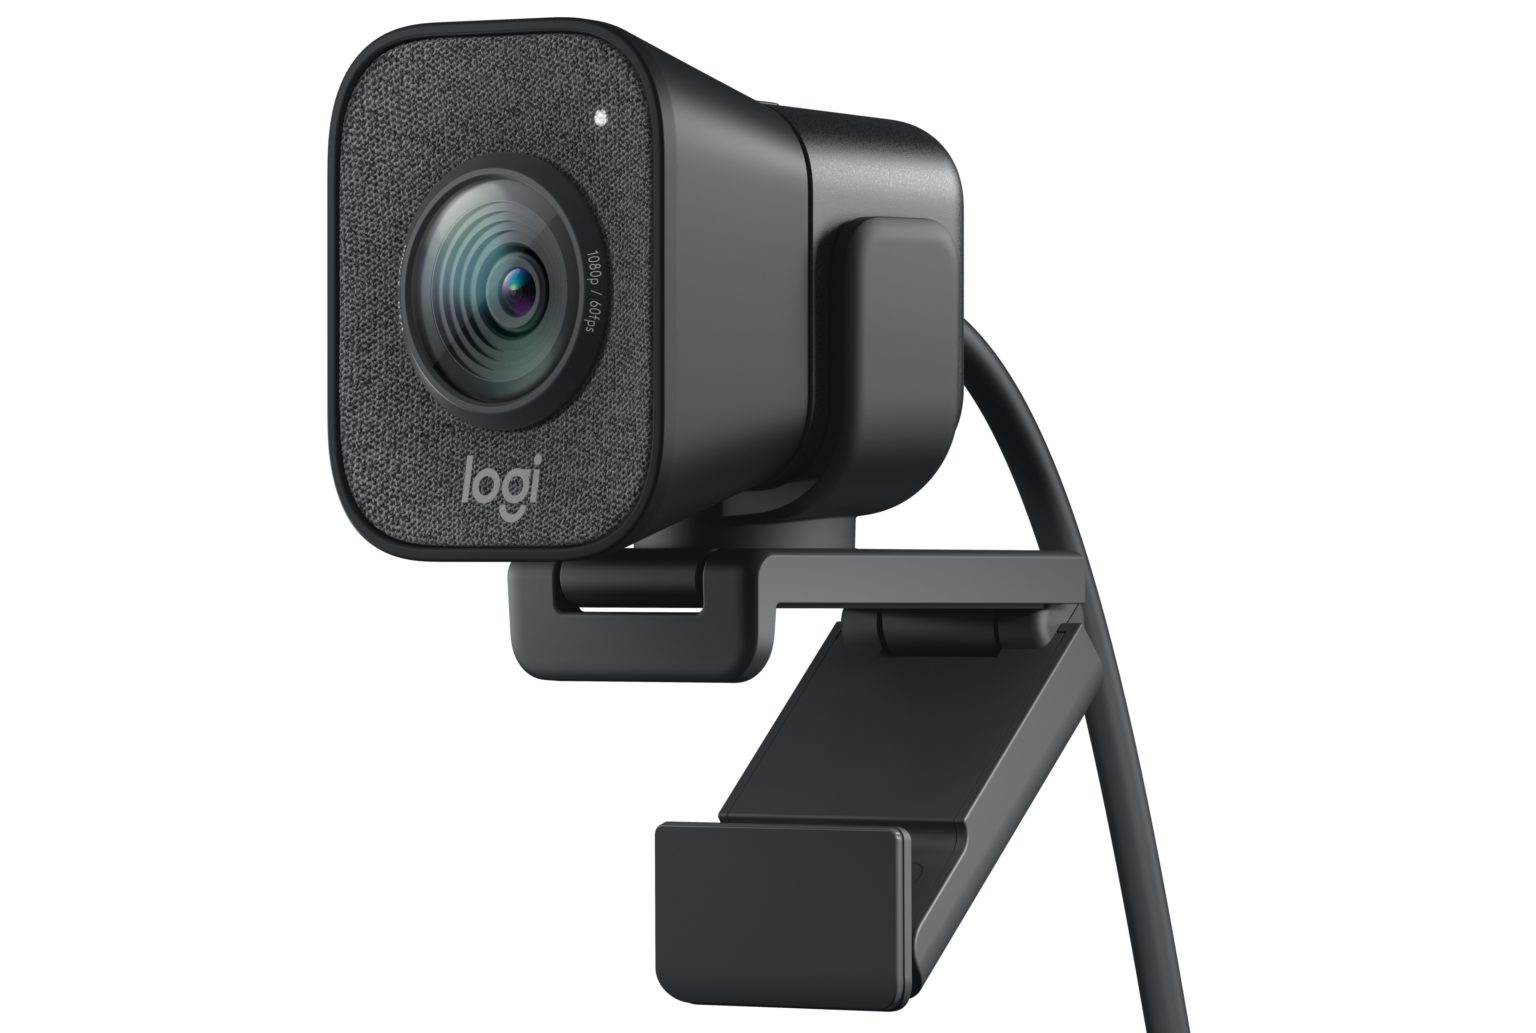 Paired with Logitech Capture software, the new StreamCam makes streaming video smart.